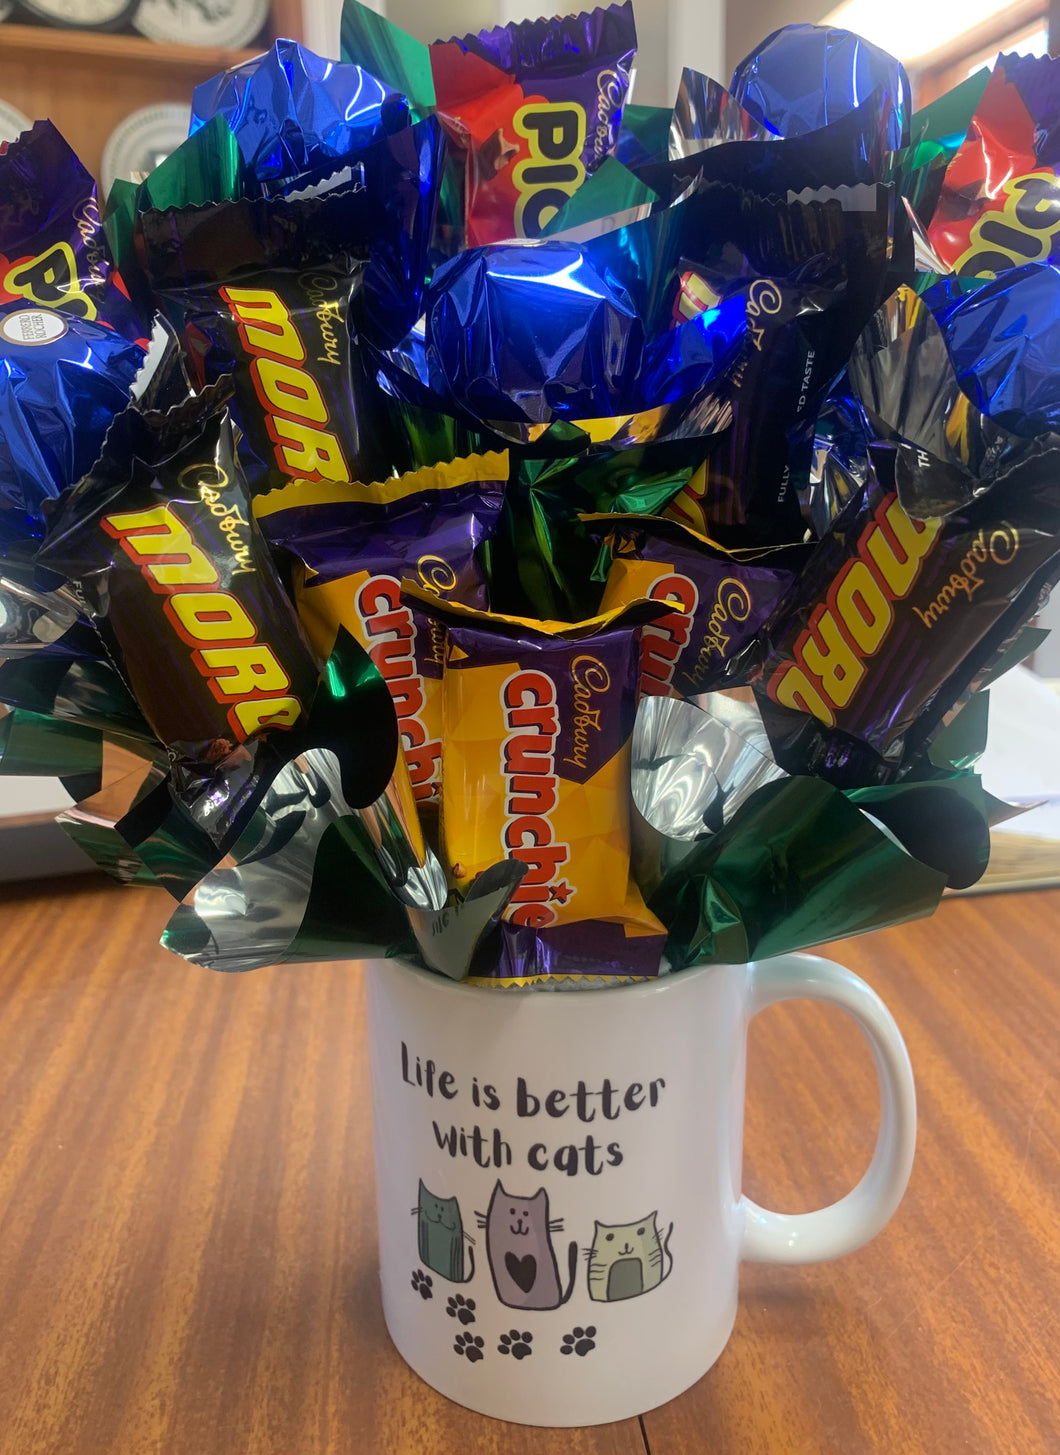 Life is better with cats mug with chocolate bouquet